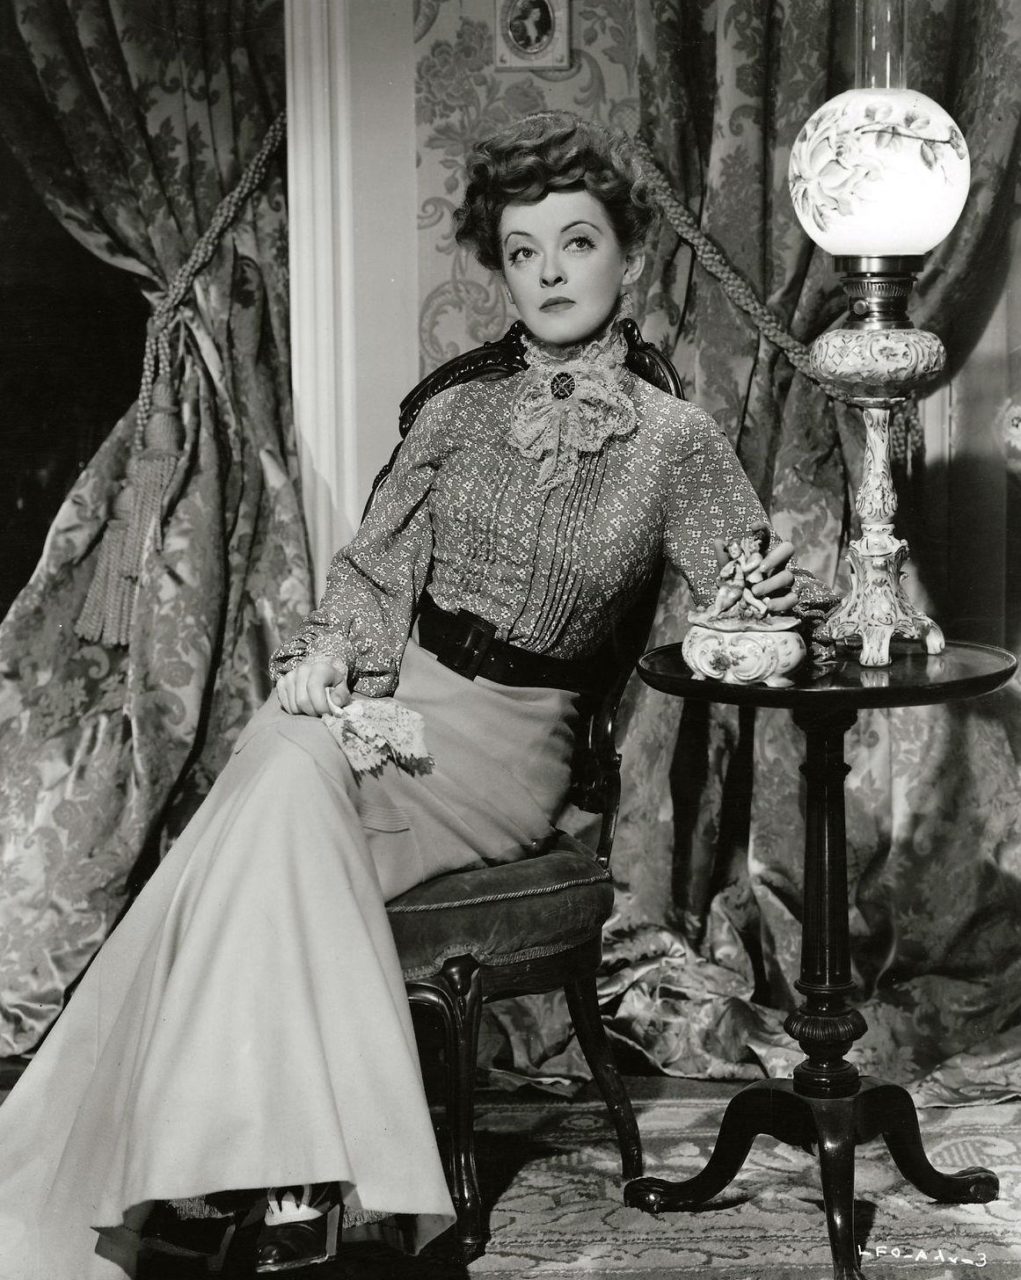 Bette Davis as Regina Giddens in a publicity photograph for The Little Foxes